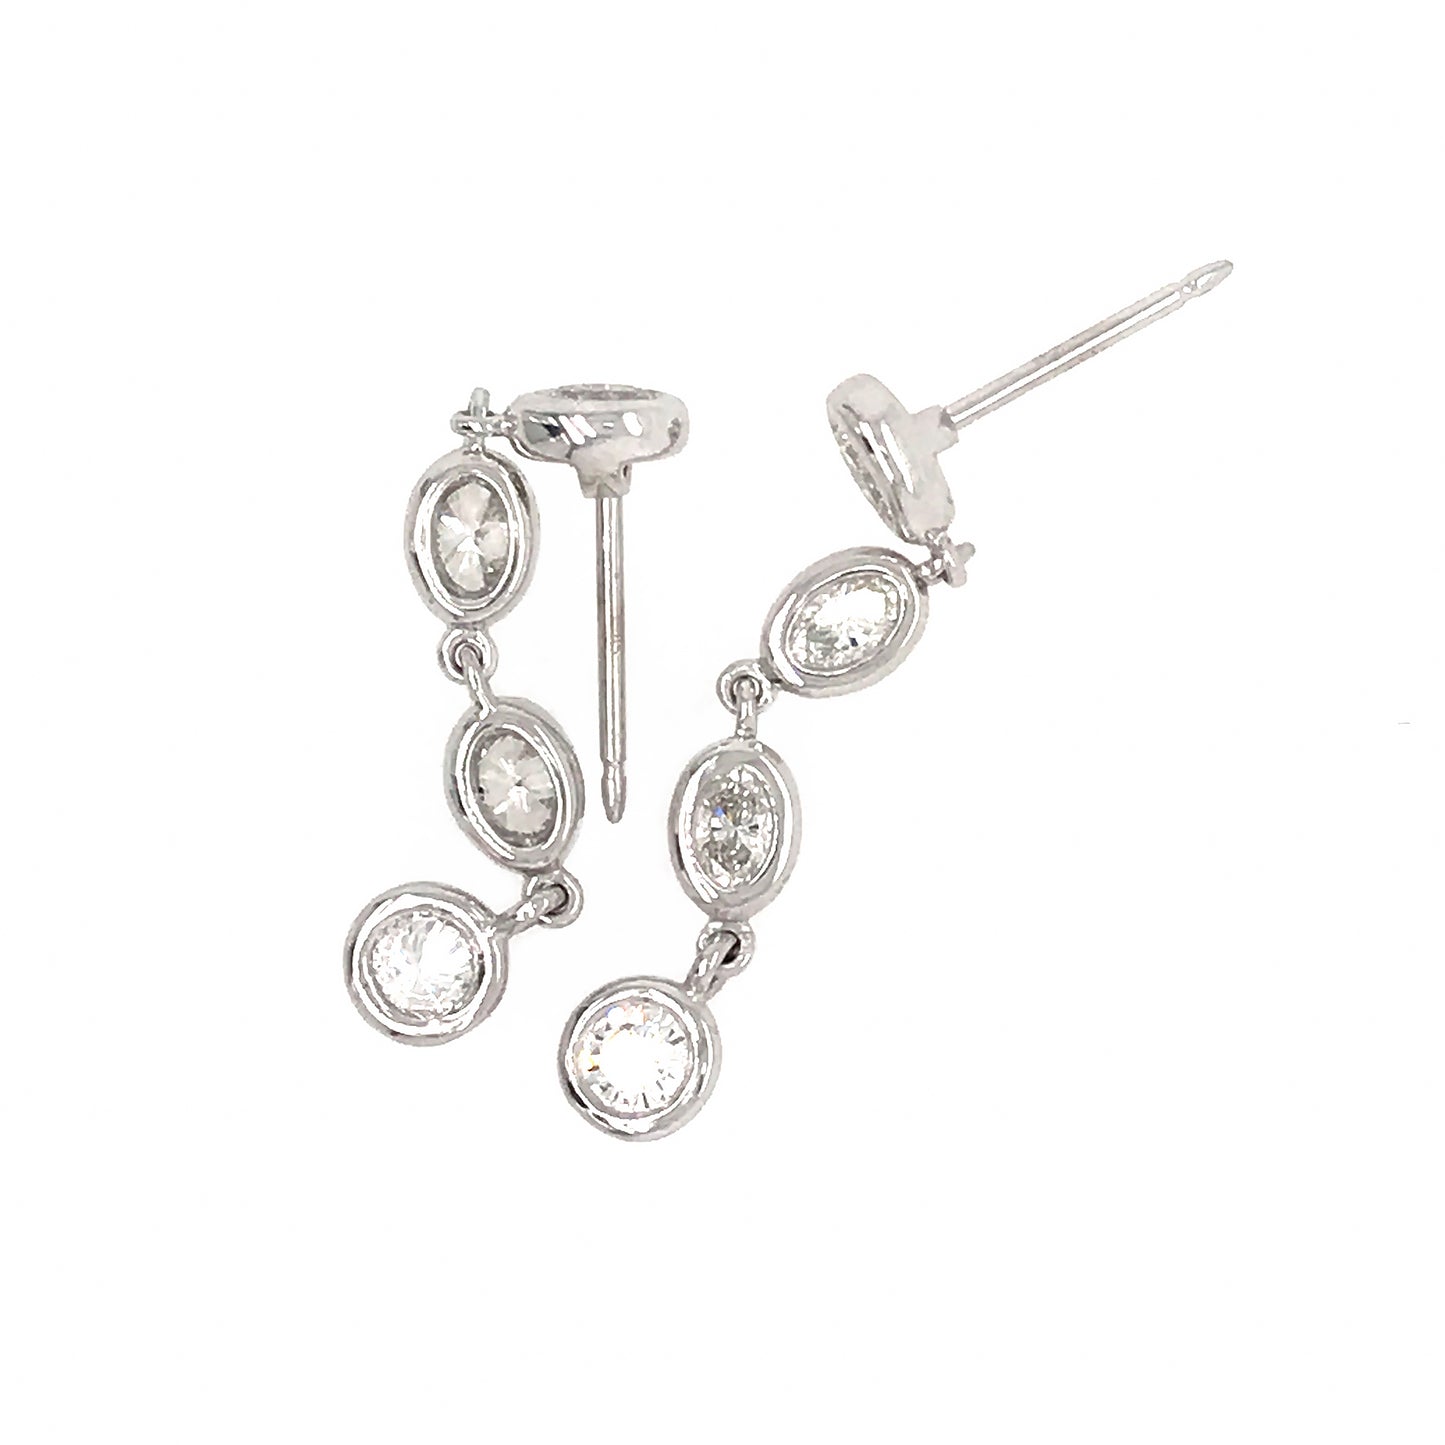 FAB DROPS 14k White Gold Oval and Round Diamond Drop Earrings